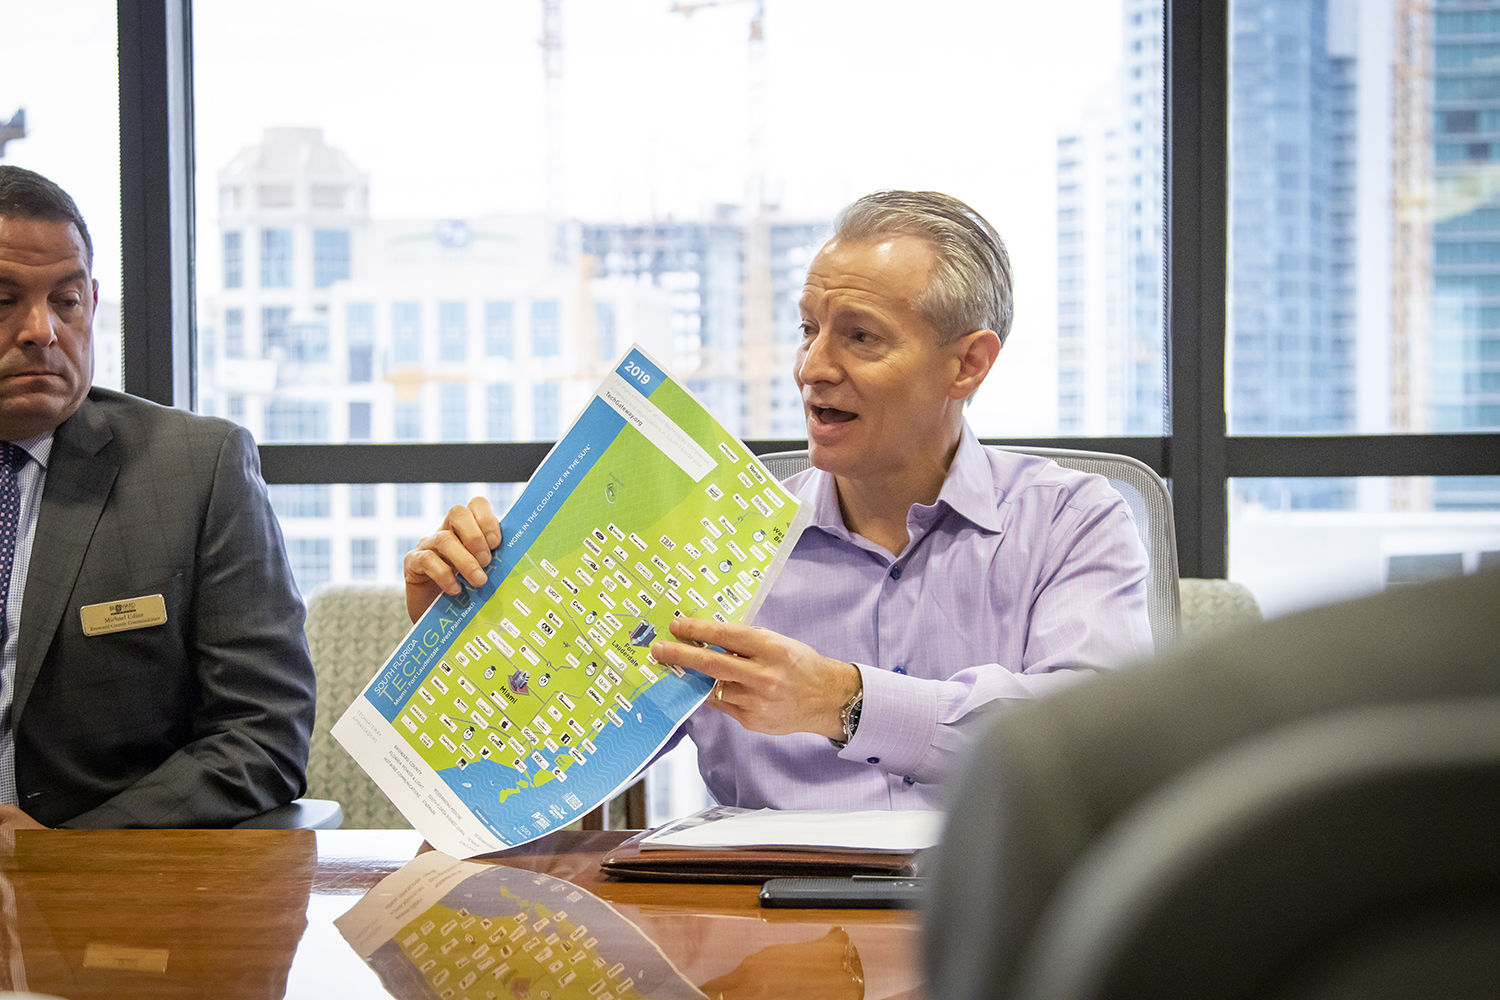 MotionPoint CEO Will Fleming holds a TechGateway map, which provides a visual reference to the abundance of tech firms in South Florida